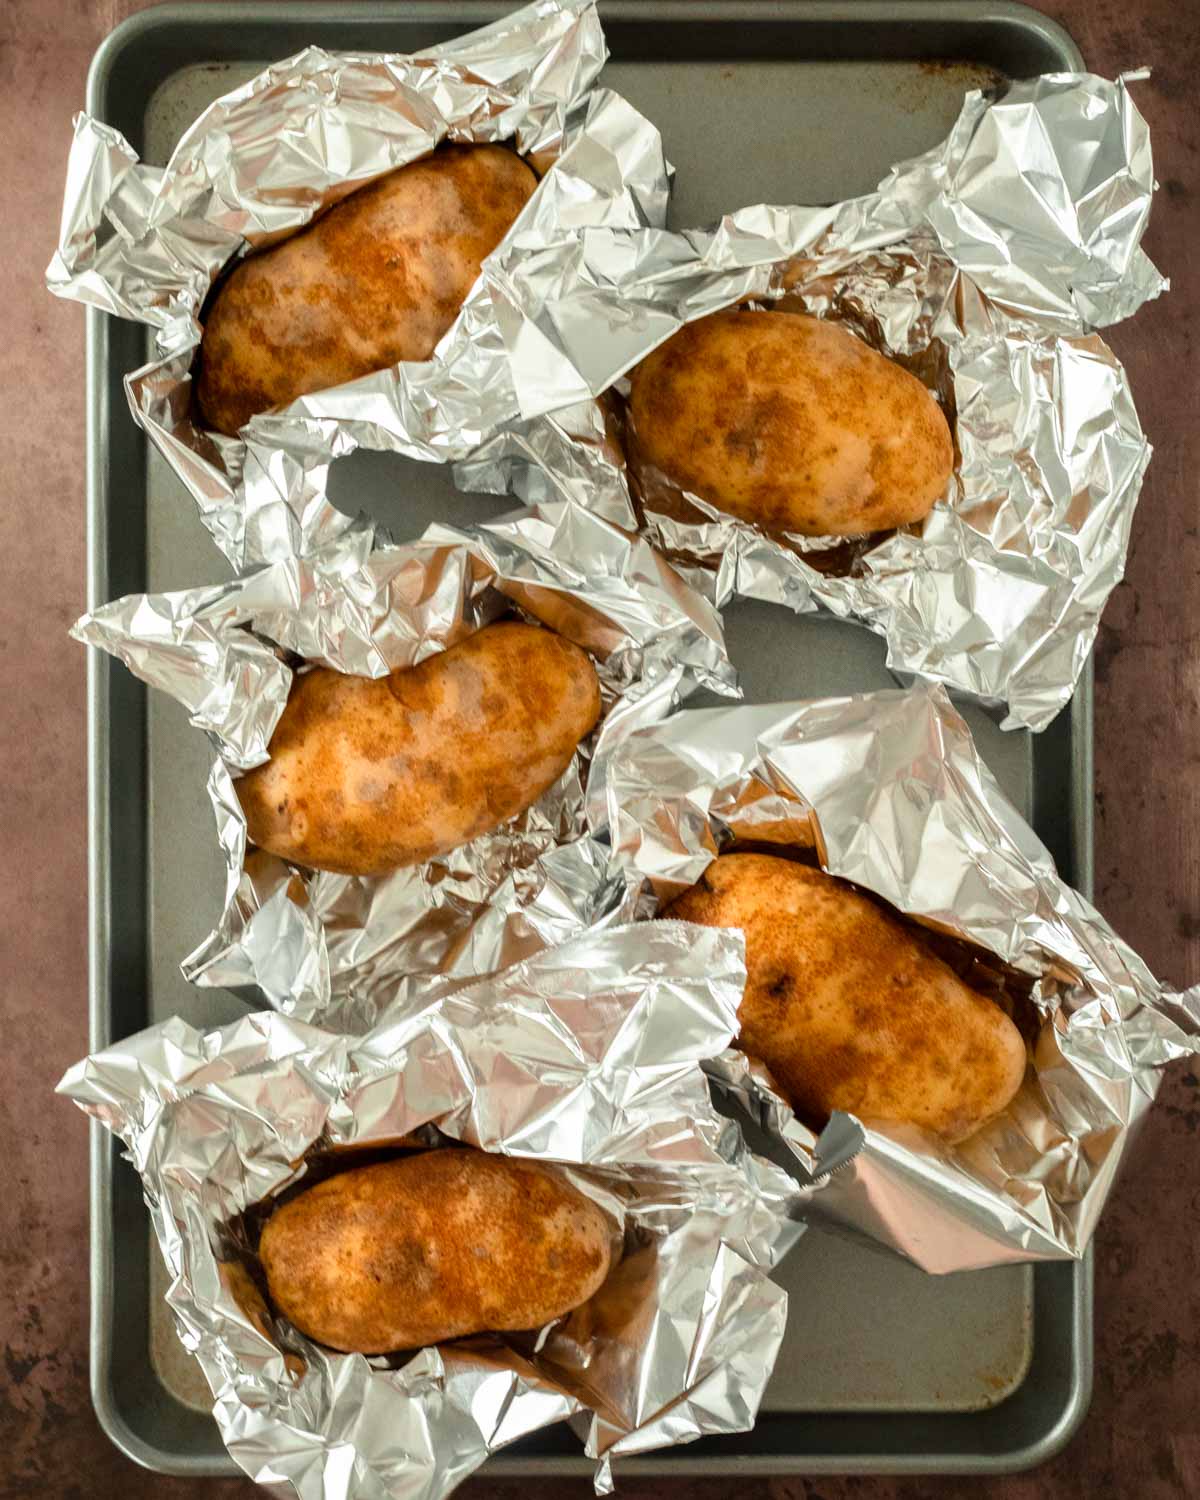 Step 1. Wrap the potatoes in foil and bake in the oven